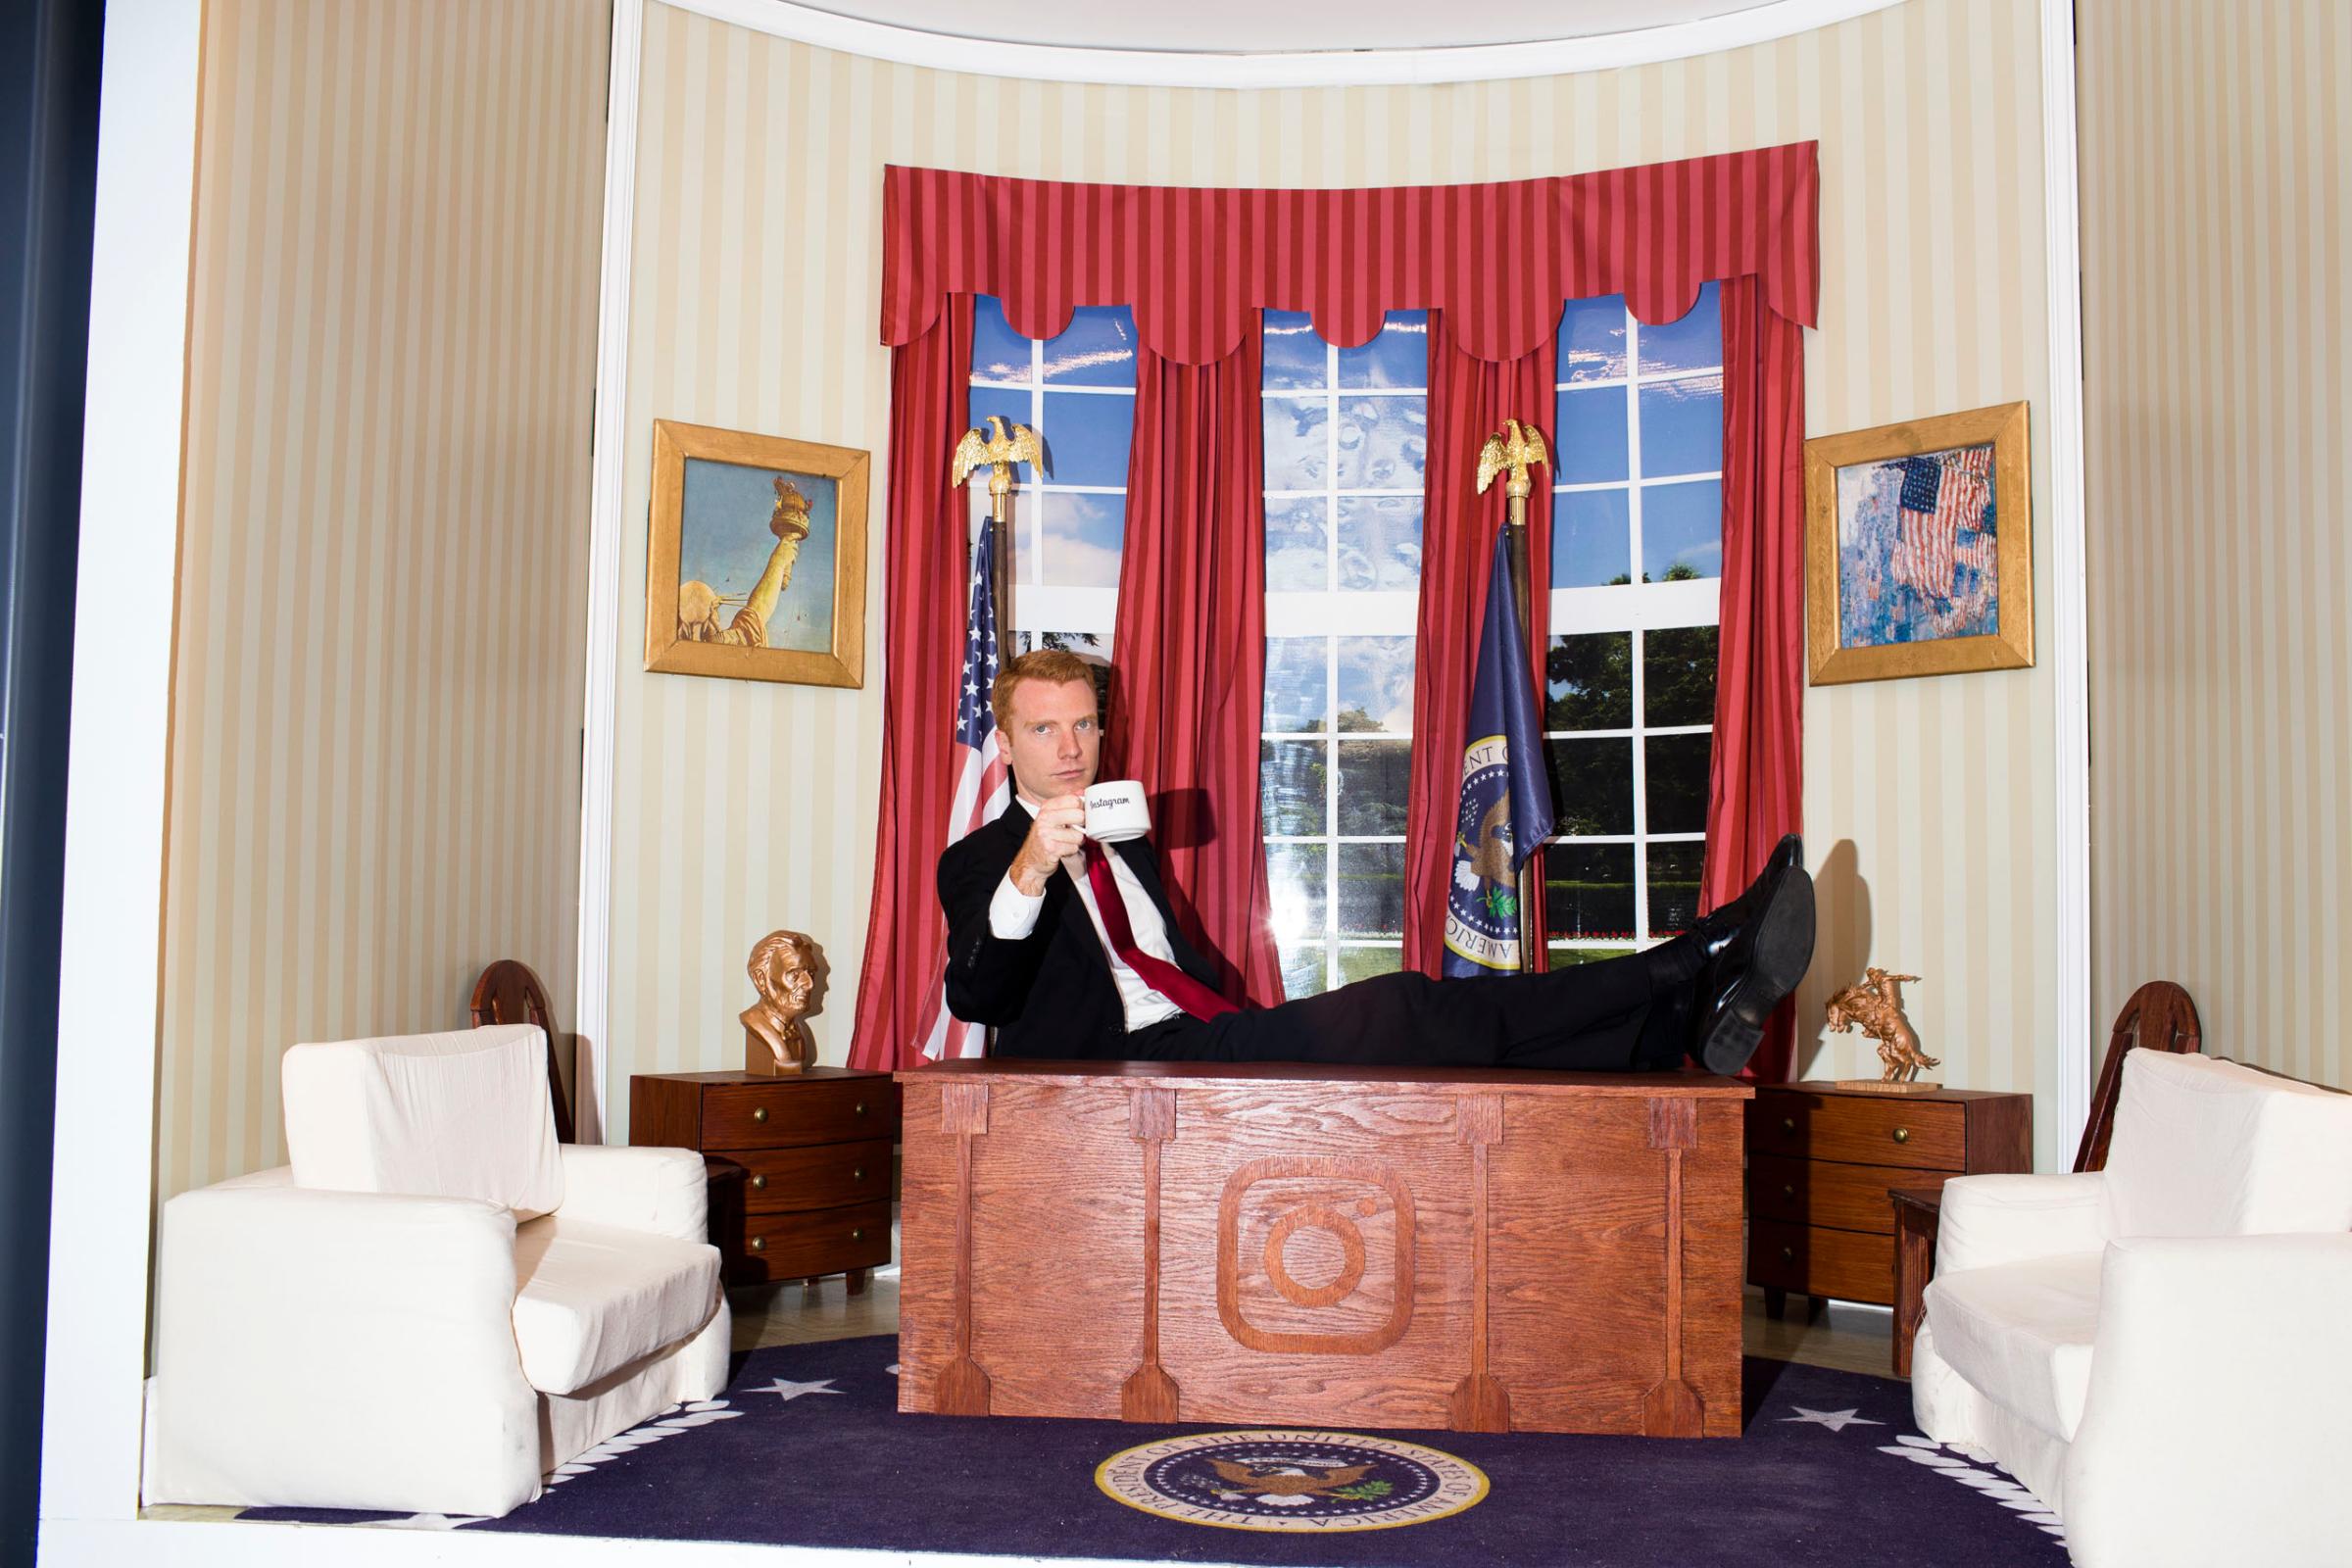 A man poses at Instagram's "Mini Oval" office at the 2016 Republican National Convention in Cleveland on Wednesday, July 20, 2016.